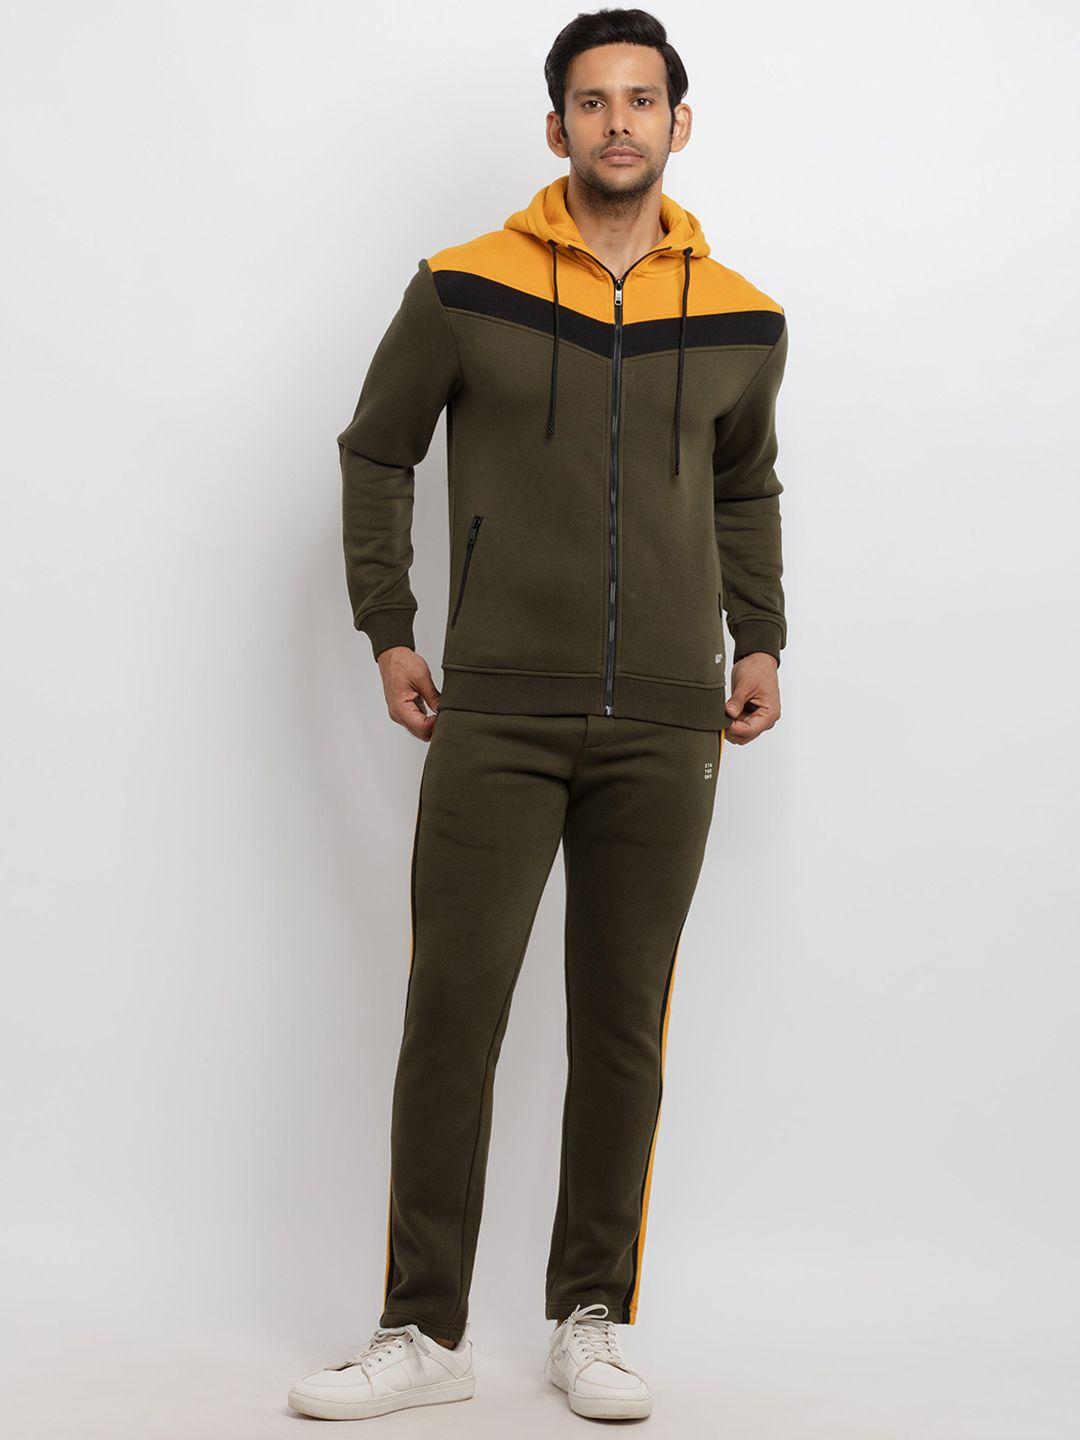 status quo men olive green & mustard yellow solid cotton hooded tracksuit